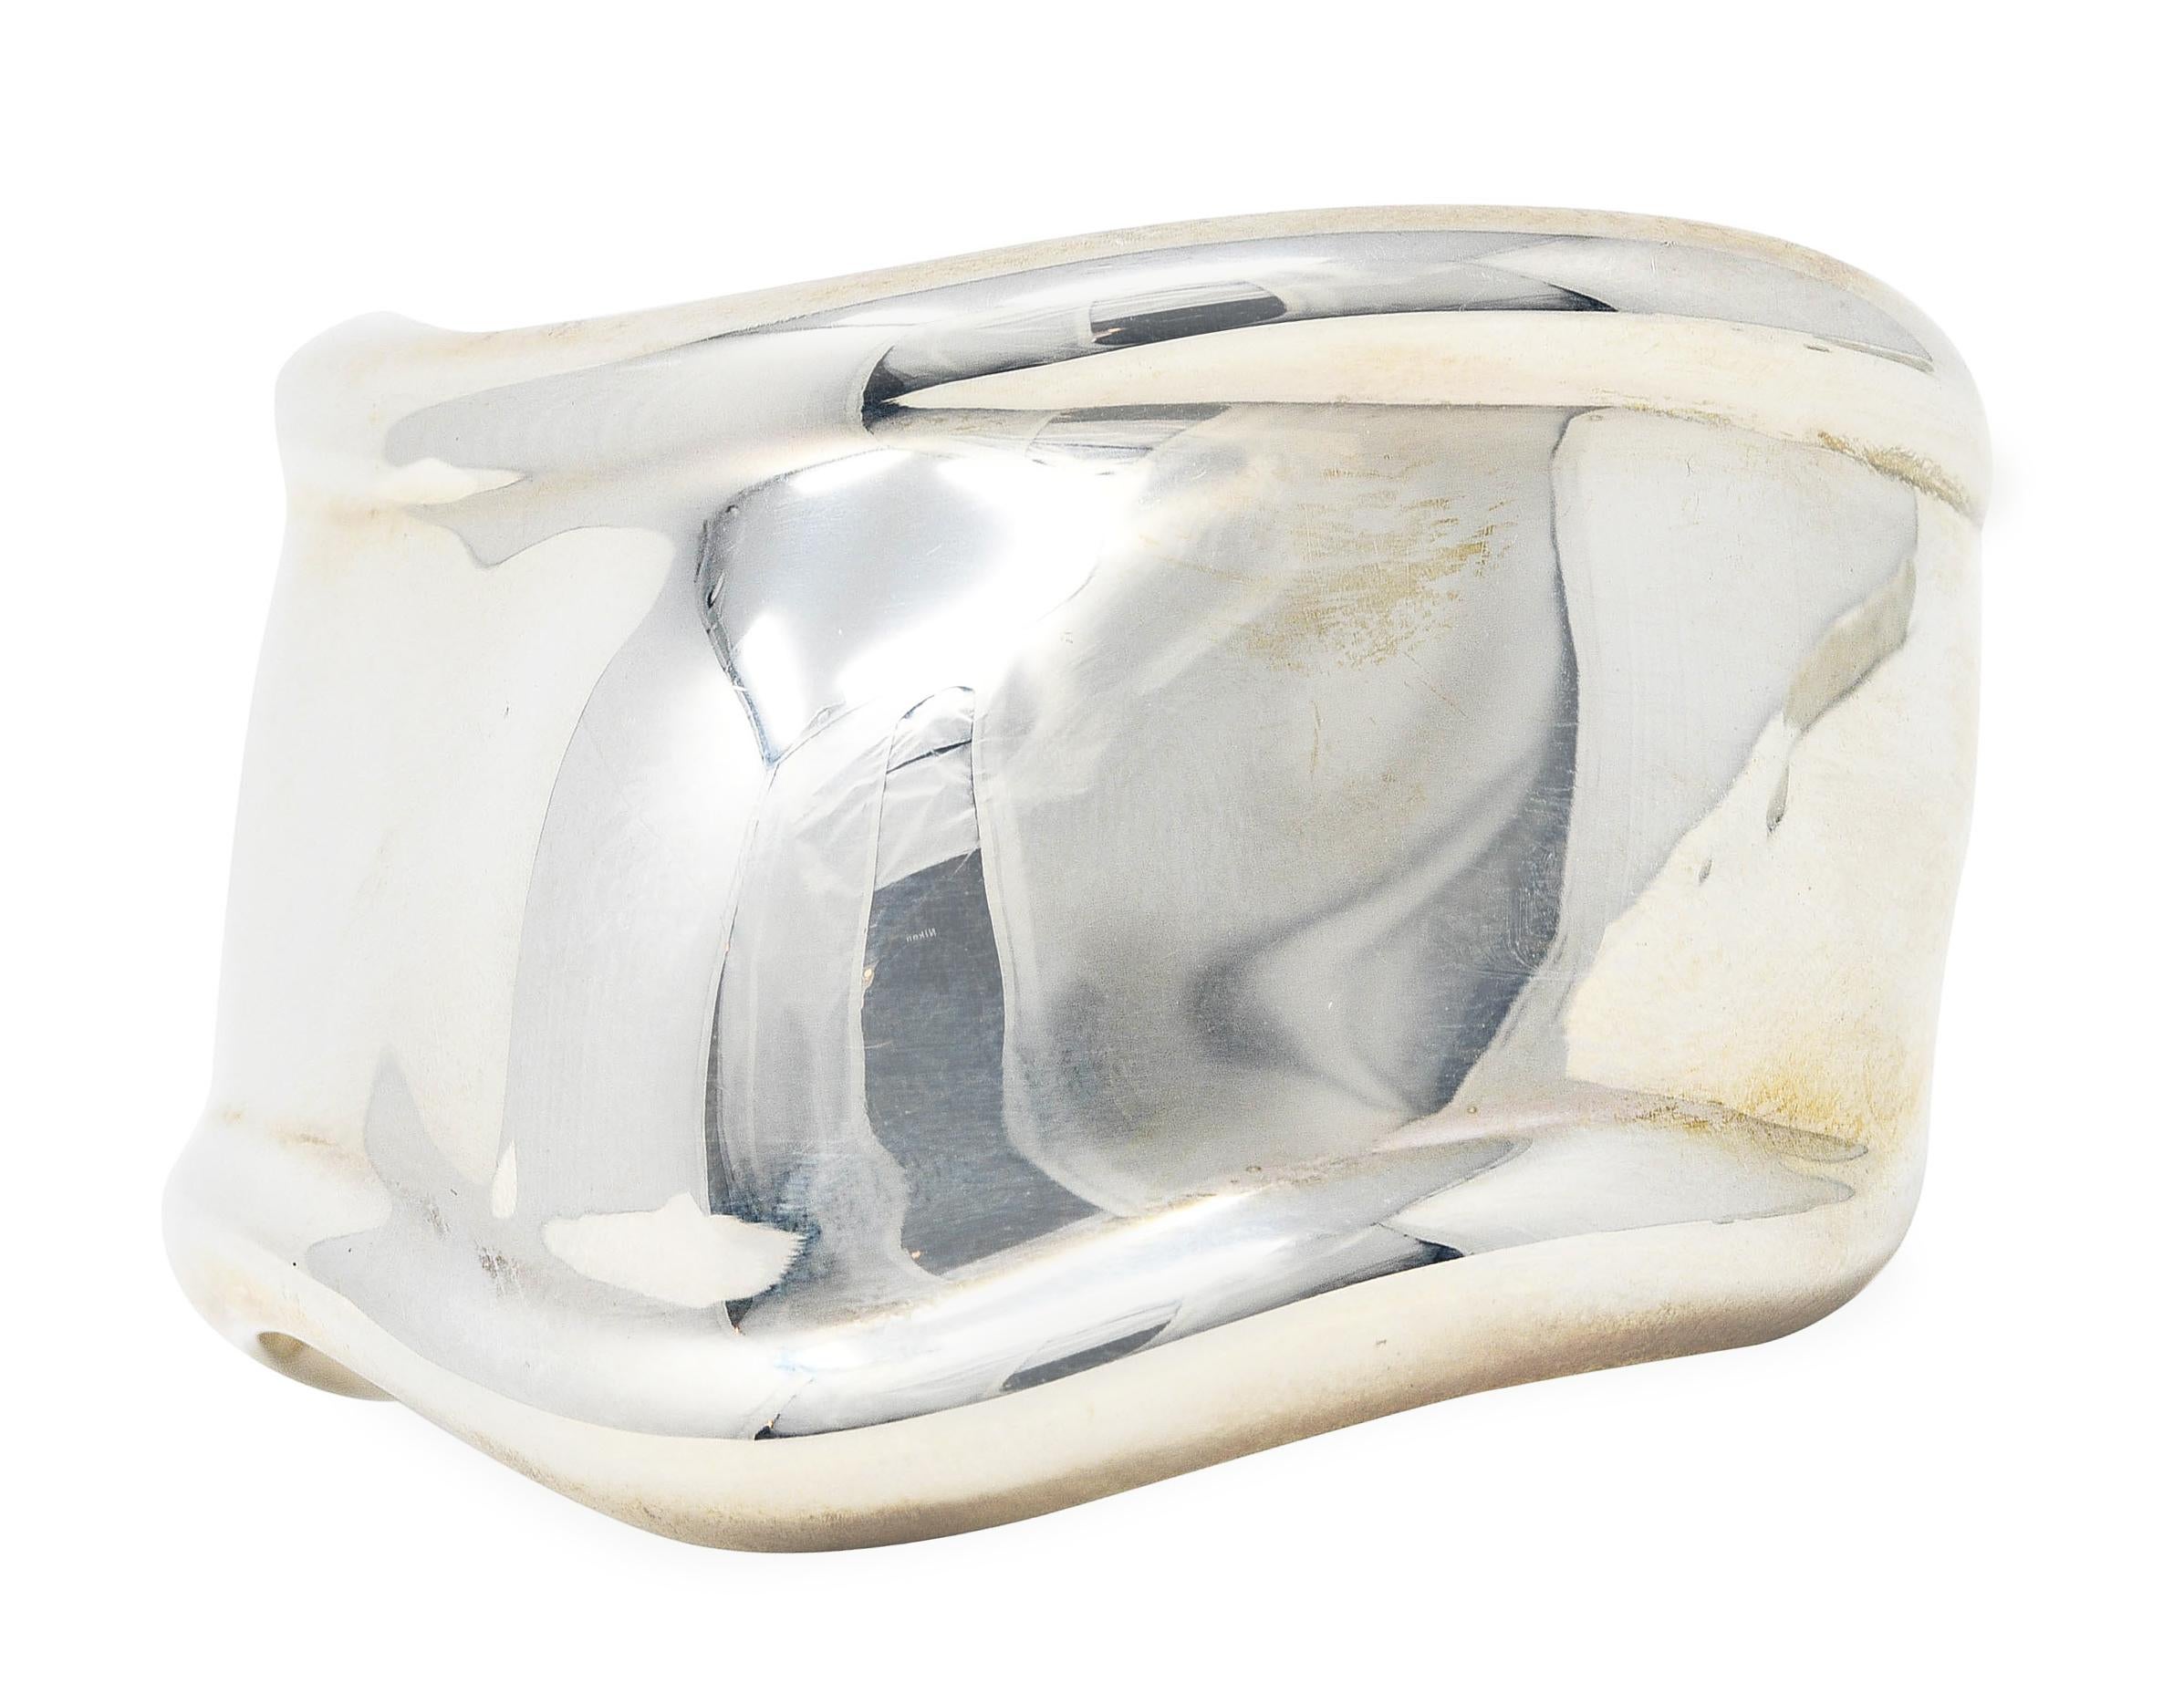 Cuff bracelet is designed as a flowing organic wrist contour

Featuring raised wrist bone motif and fluted edges

With high polished finish

Stamped AG 925 for sterling silver

Fully signed Elsa Peretti Tiffany & Co. Italy

Circa: Late 20th century